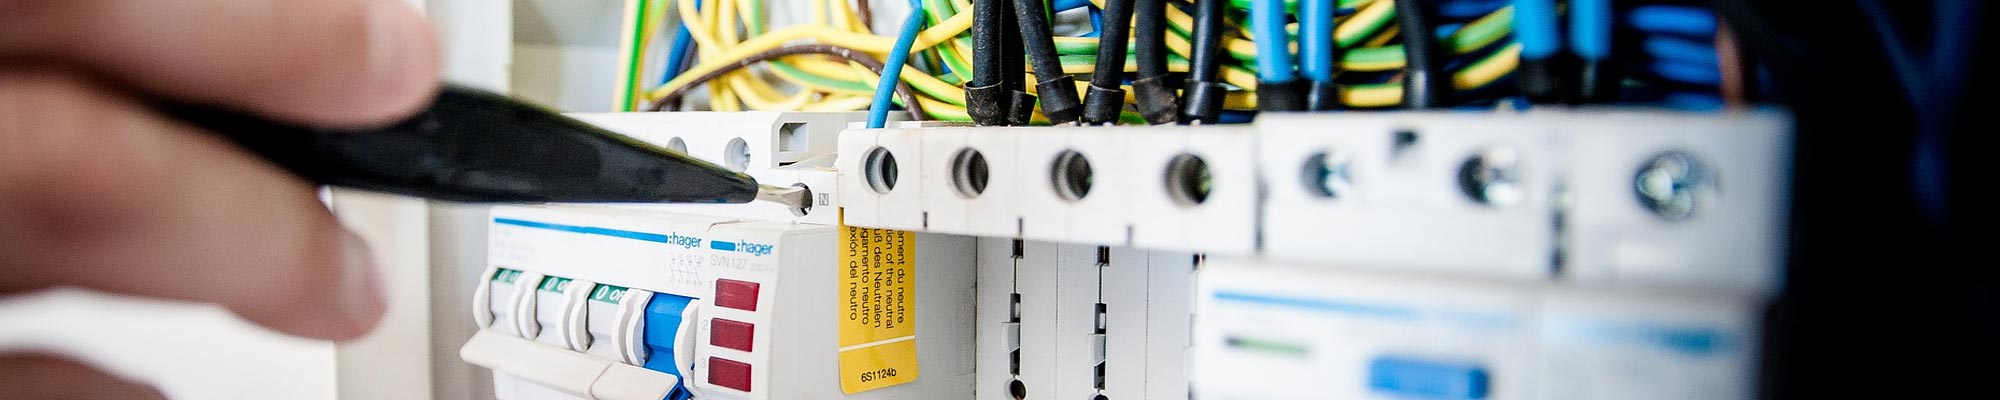 Domestic Fuse Boards - Electricians in Reading